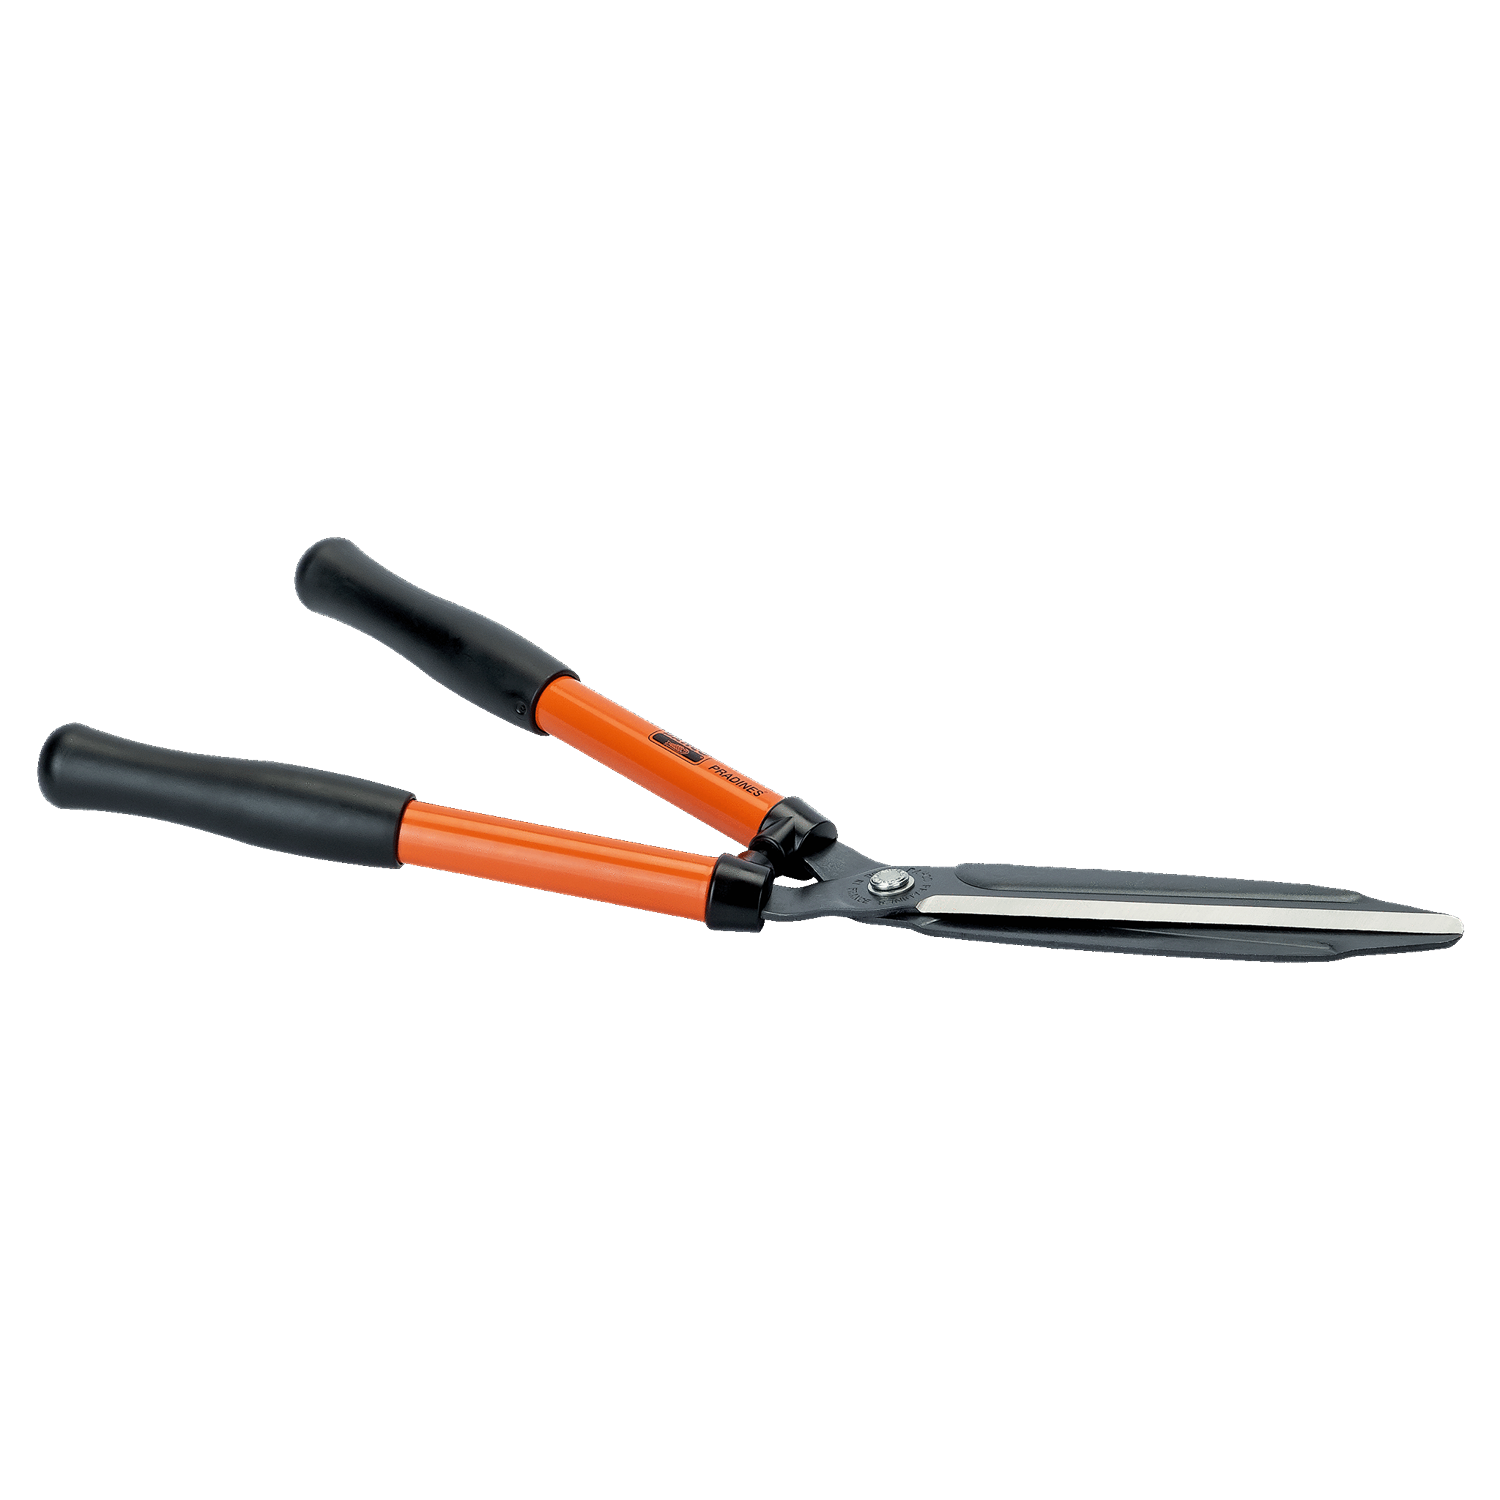 BAHCO P59 Universal Hedge Shears with Steel Handle - 580 mm - Premium Hedge Shears from BAHCO - Shop now at Yew Aik.